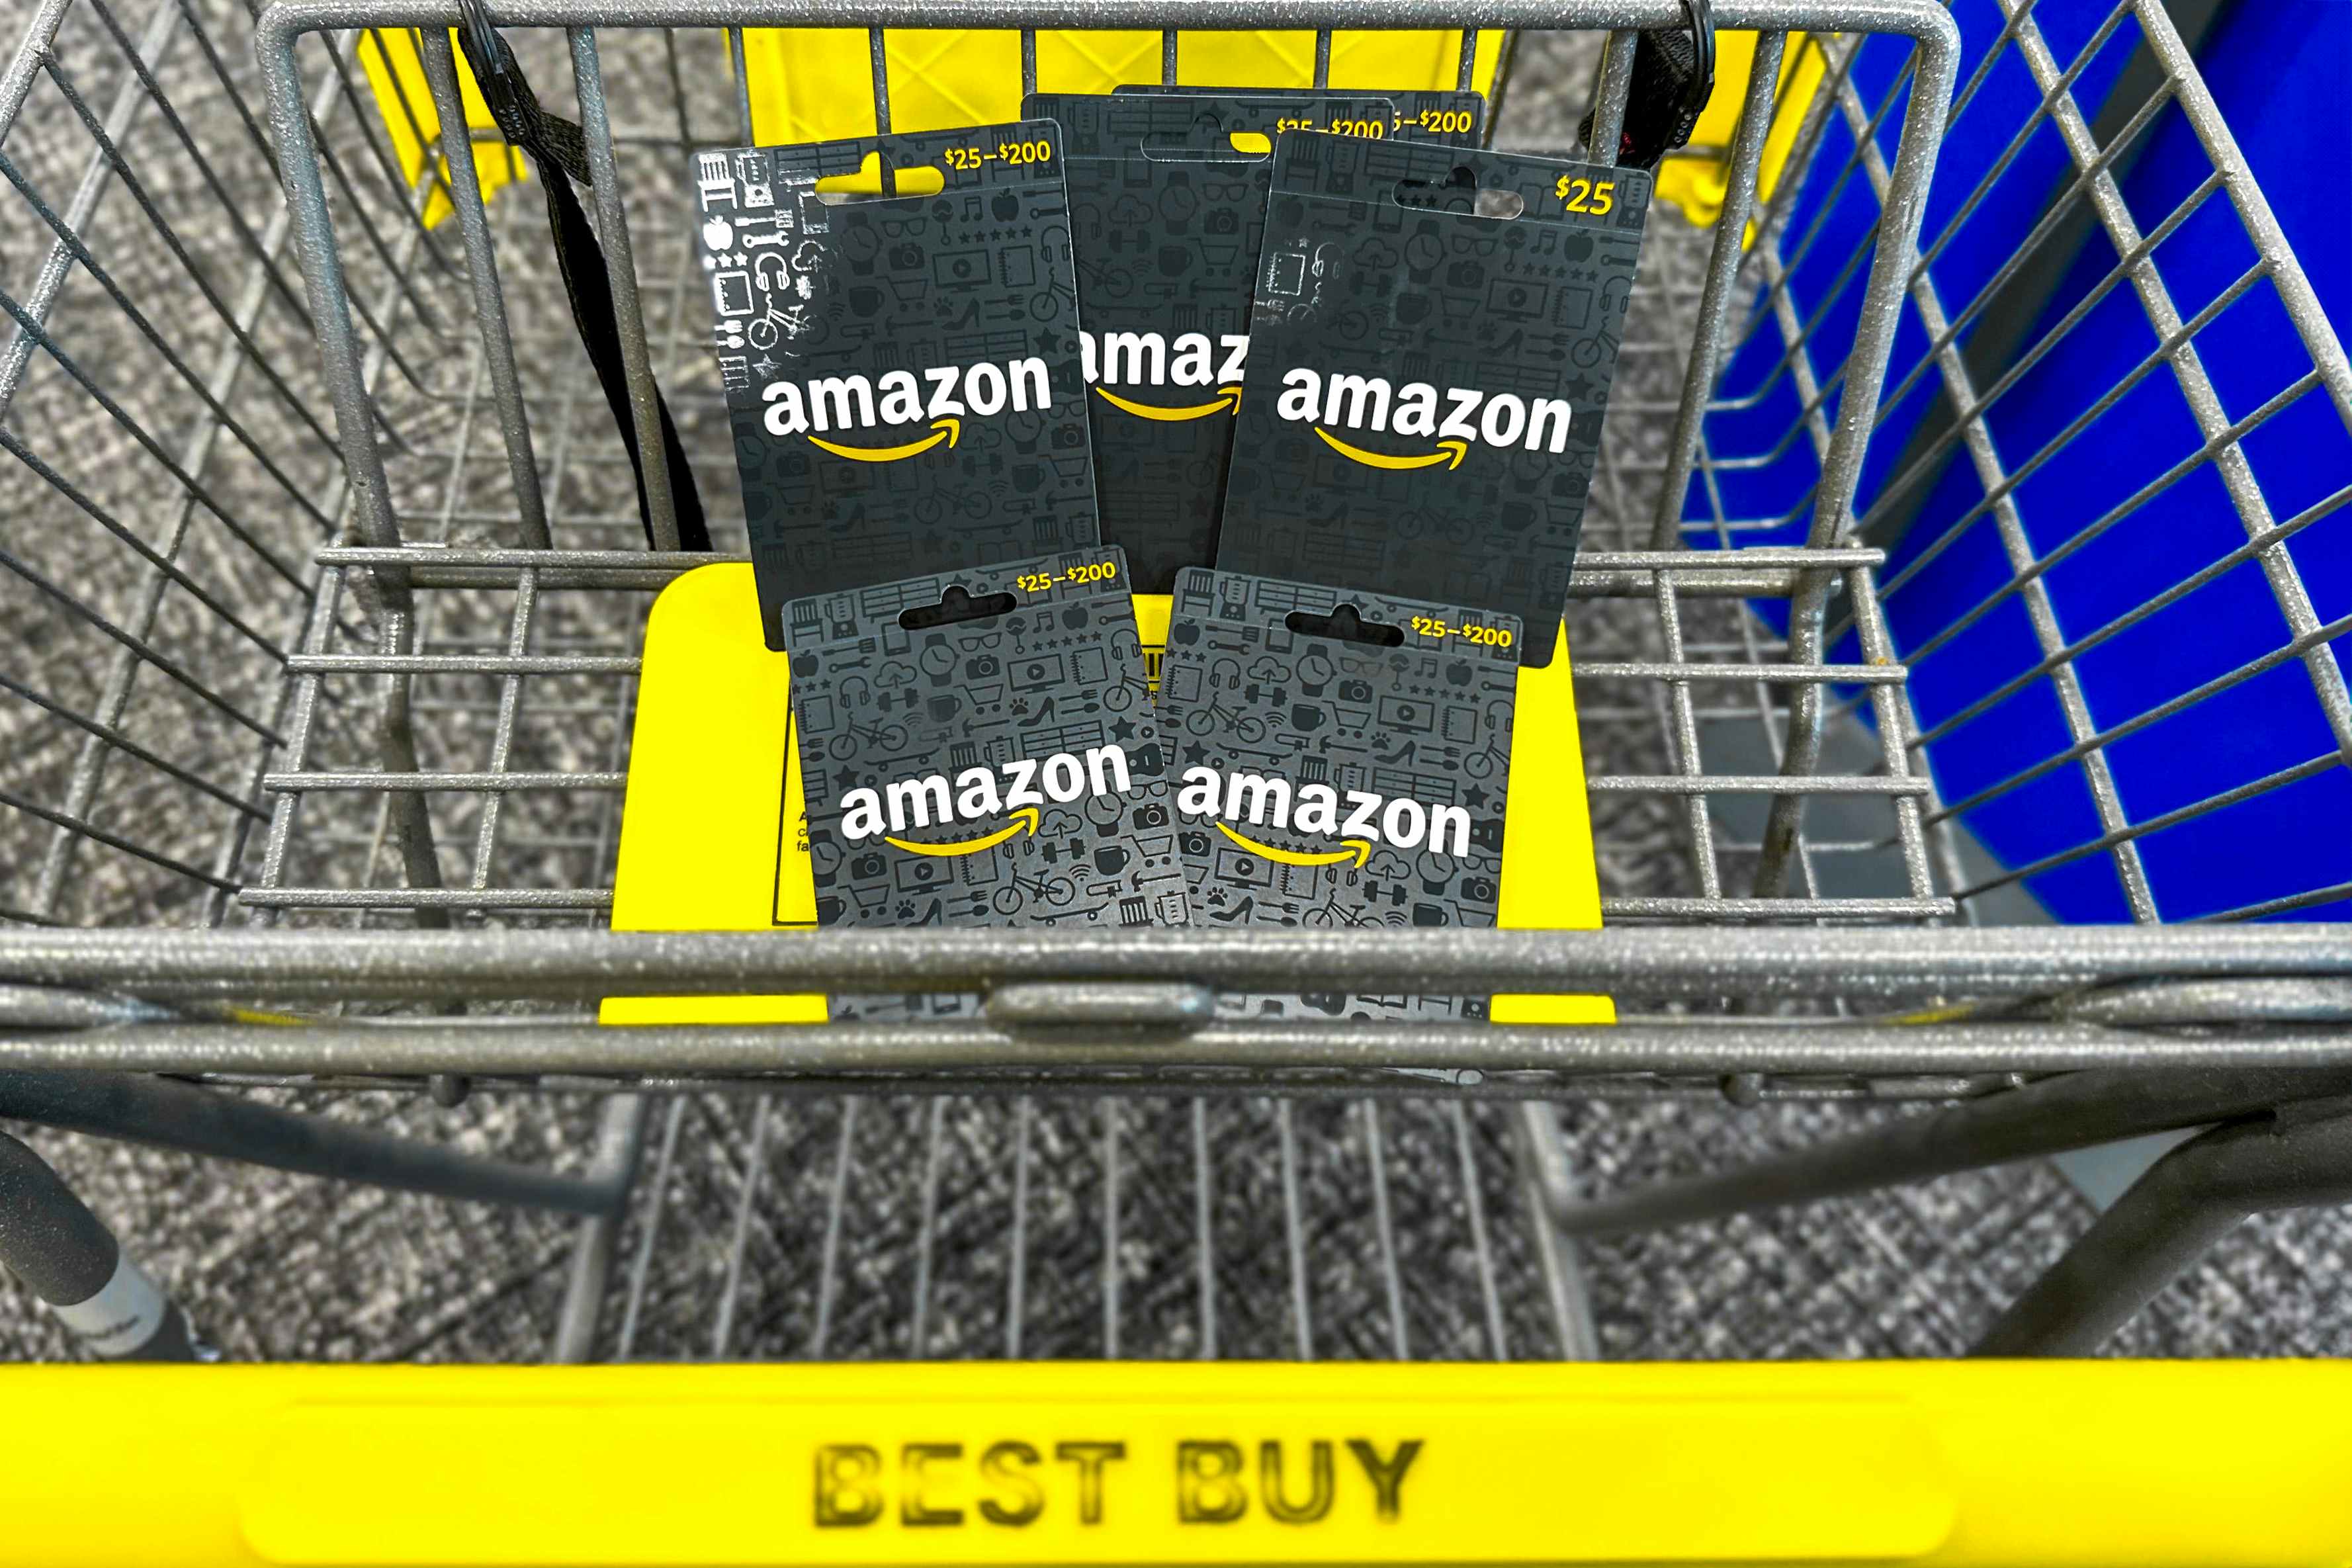 amazon gift cards in a Best Buy shopping cart